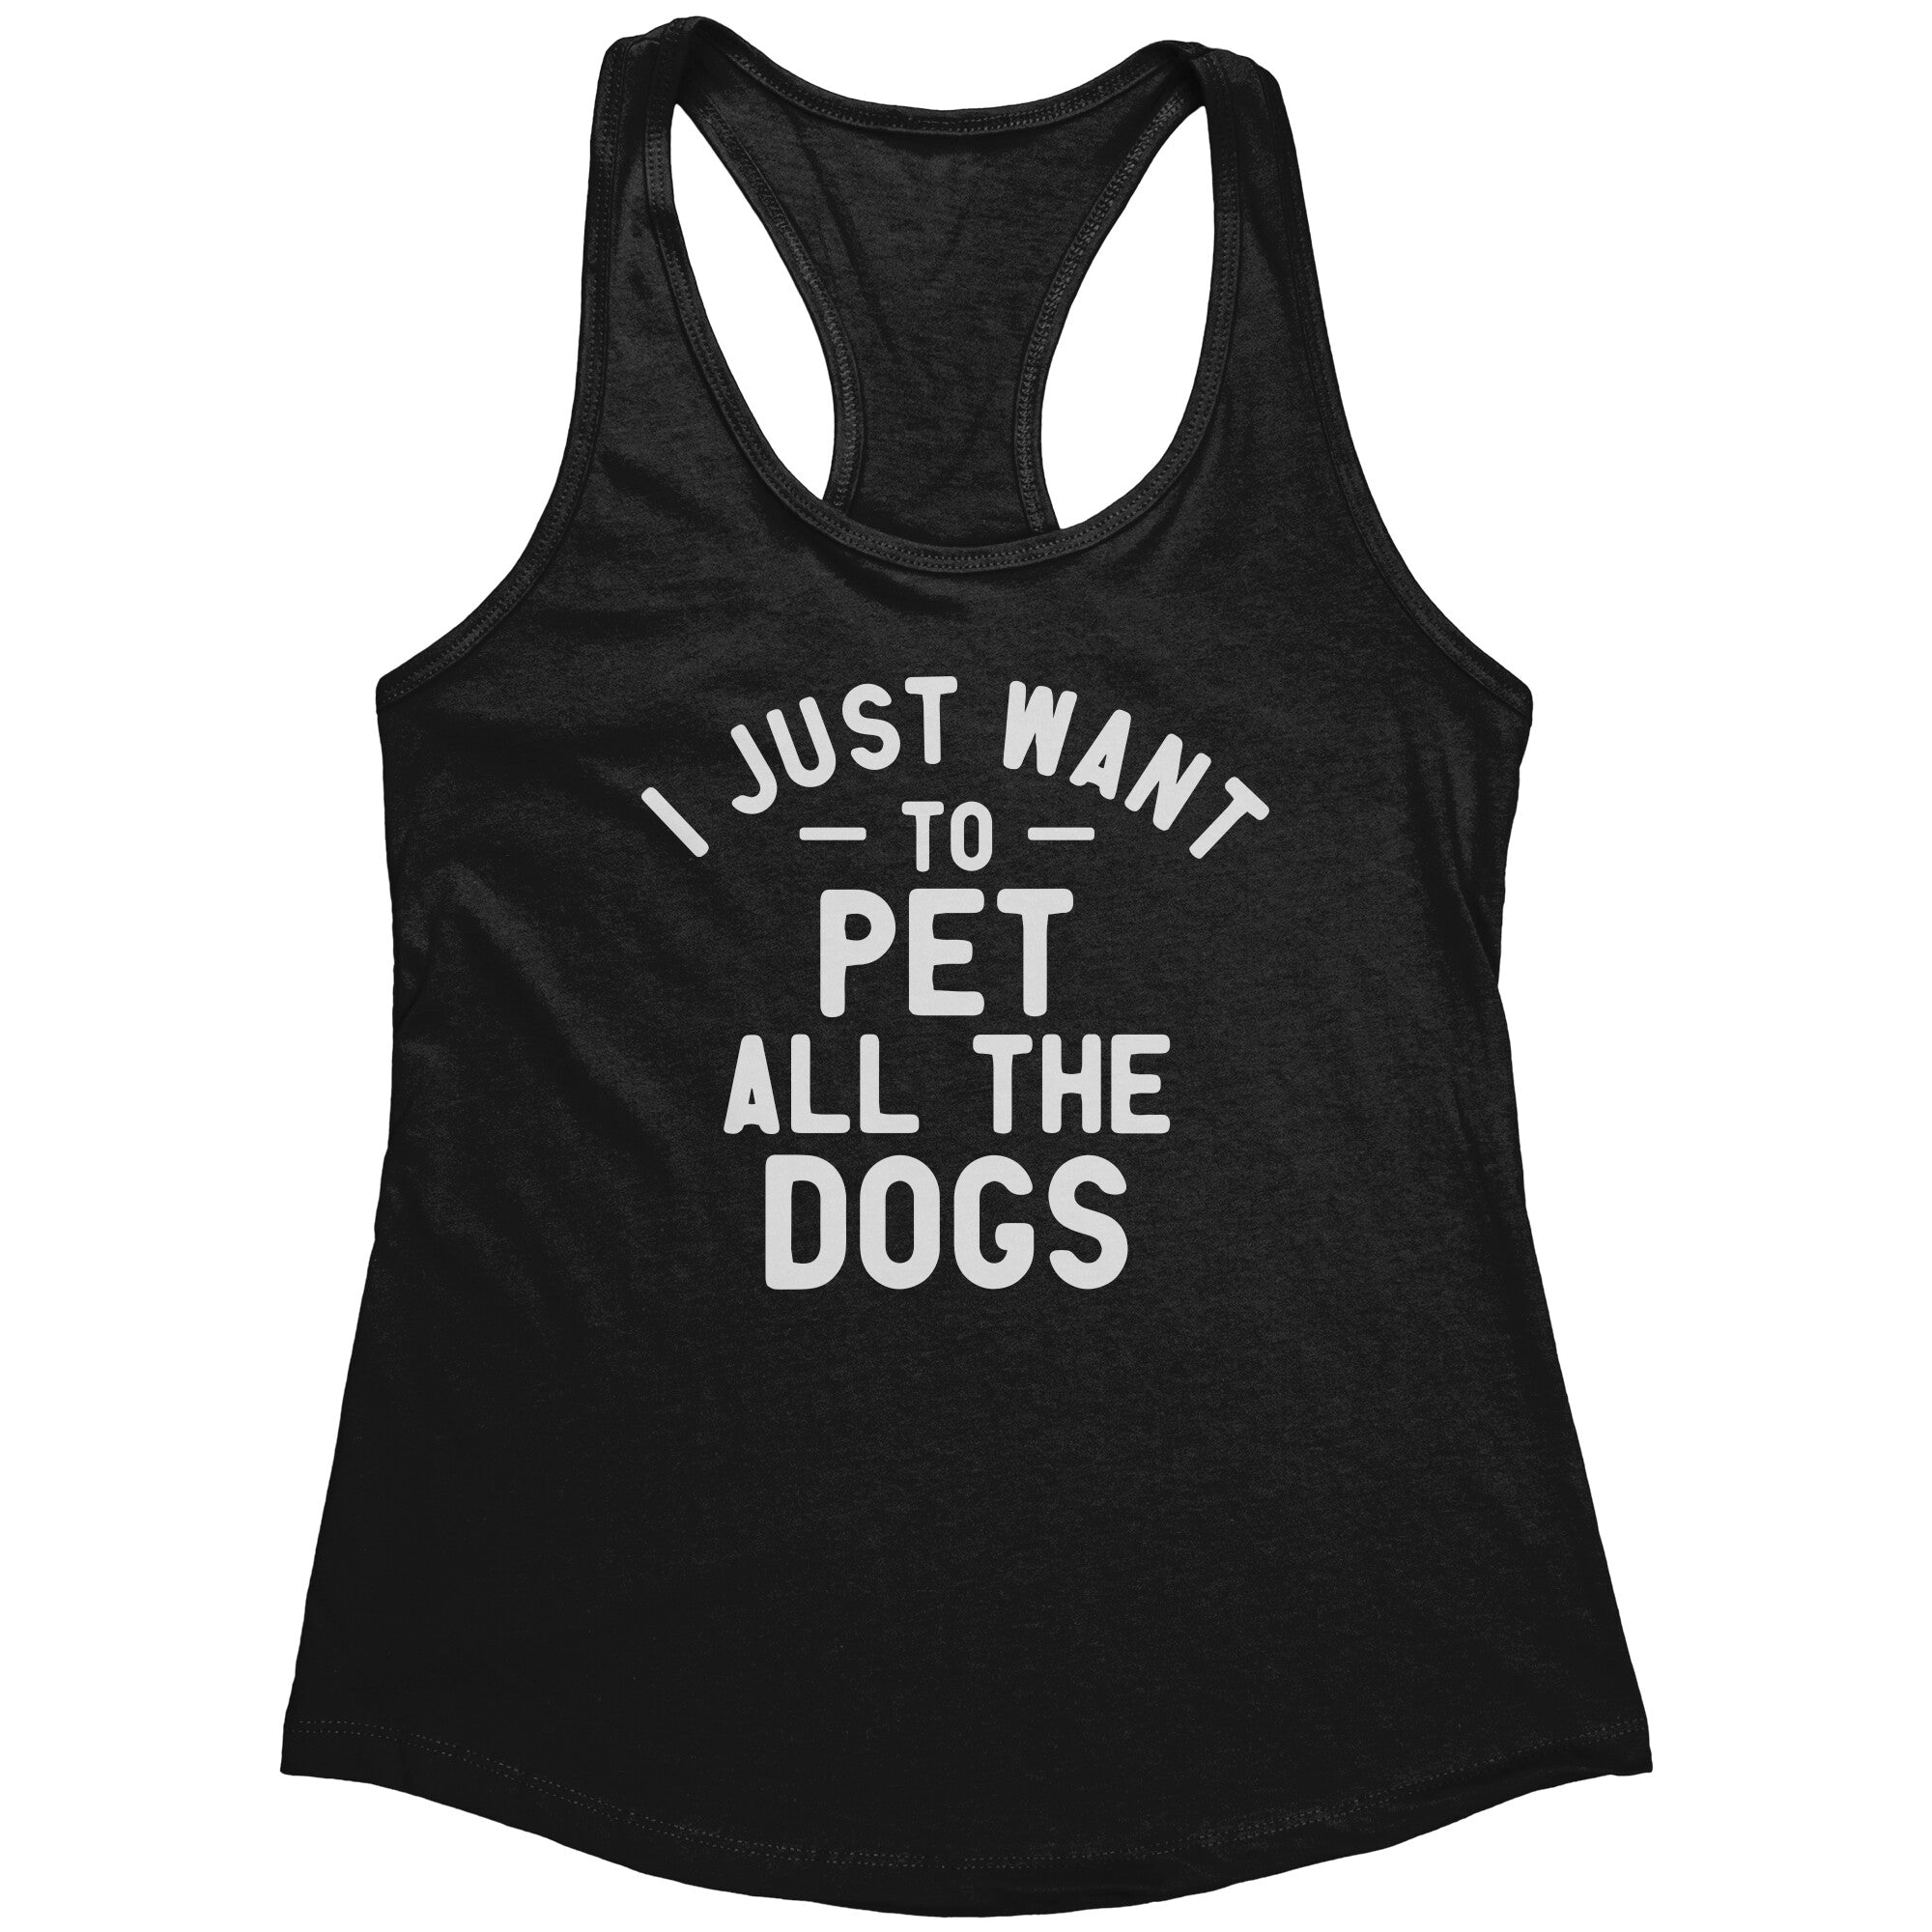 I Just Want To Pet All The Dogs (Ladies) -Apparel | Drunk America 